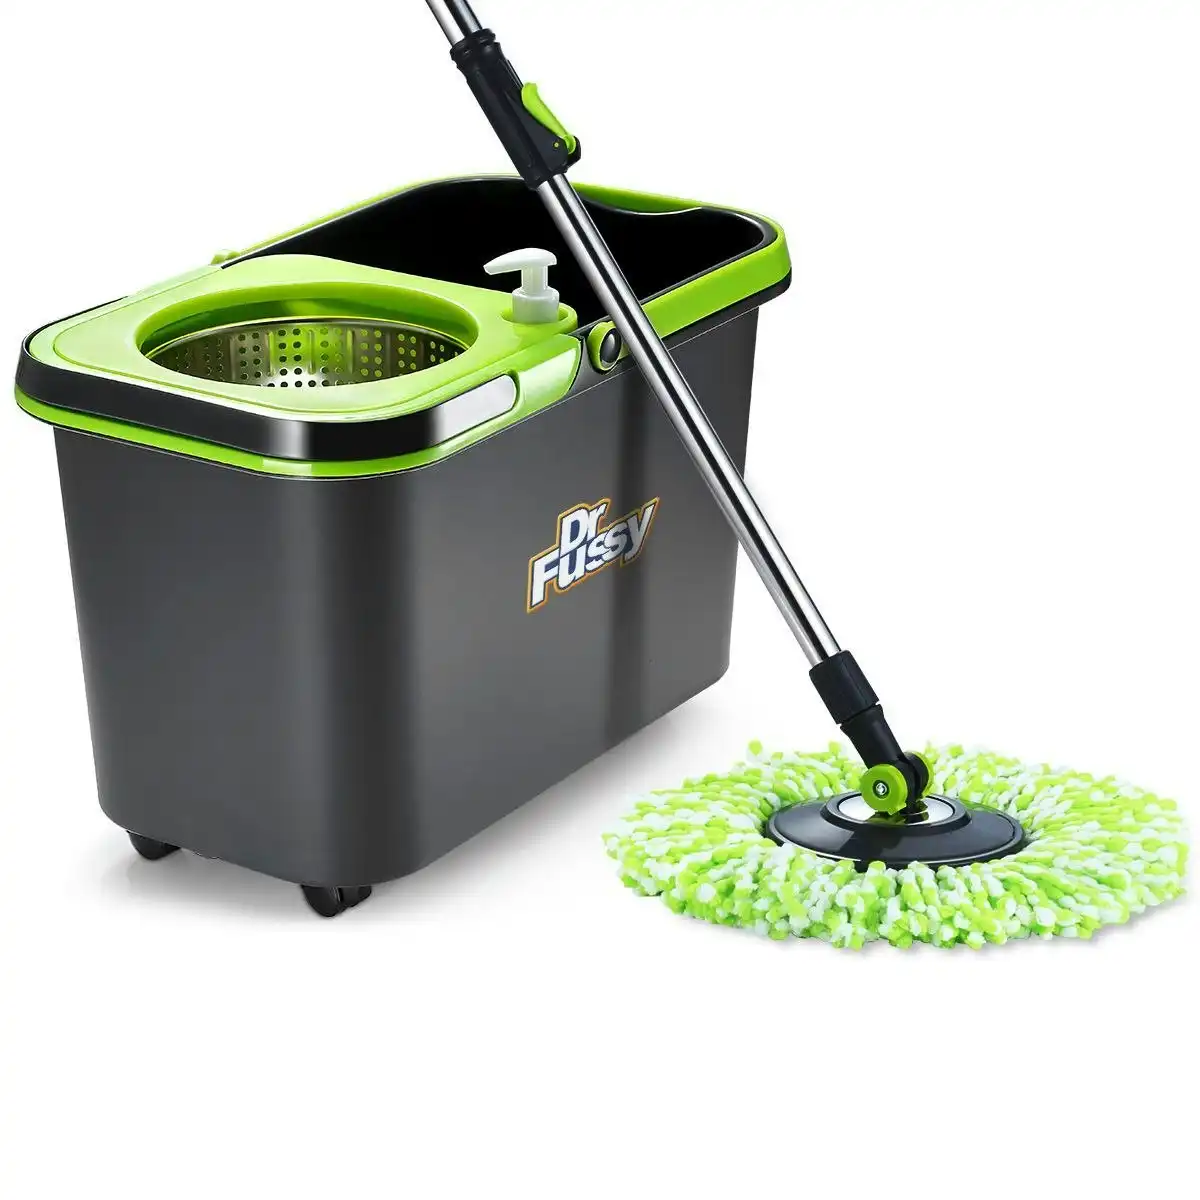 Dr FUSSY Dr. Fussy Mop 360 Degree Spin Drying Basket Including 4 Strong Mop Refills